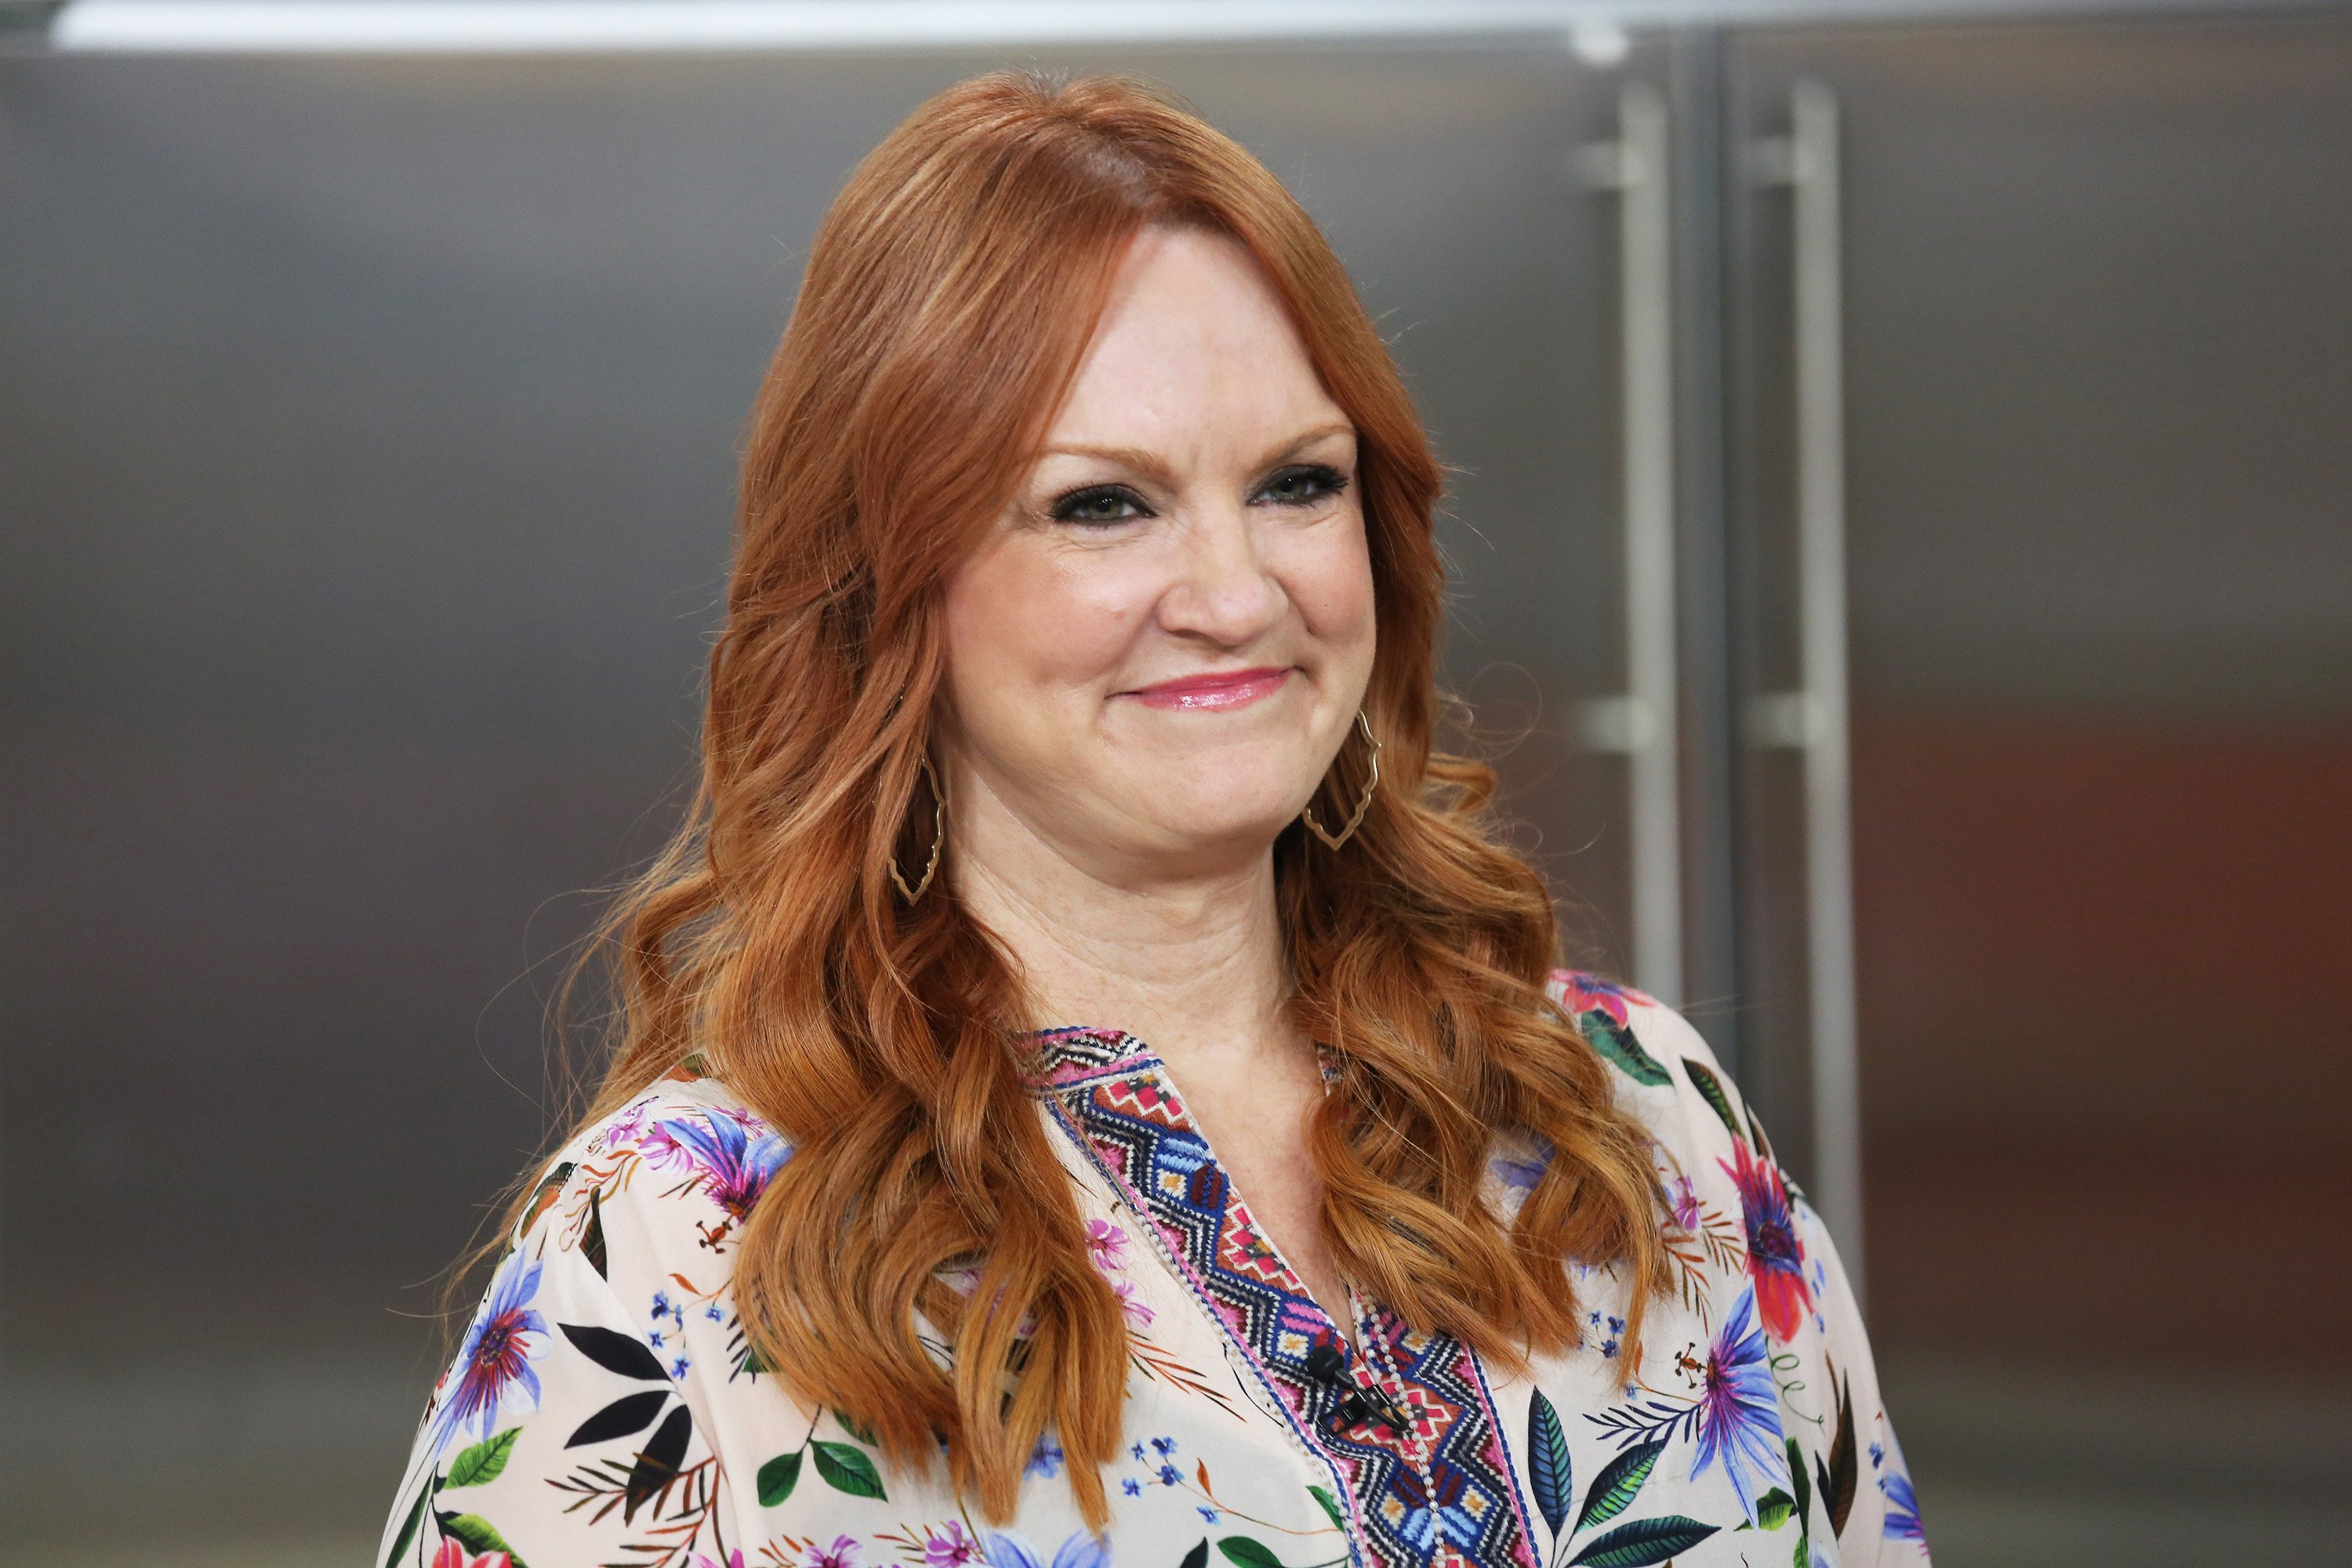 Food Network's The Pioneer Woman Ree Drummond on the Today show.